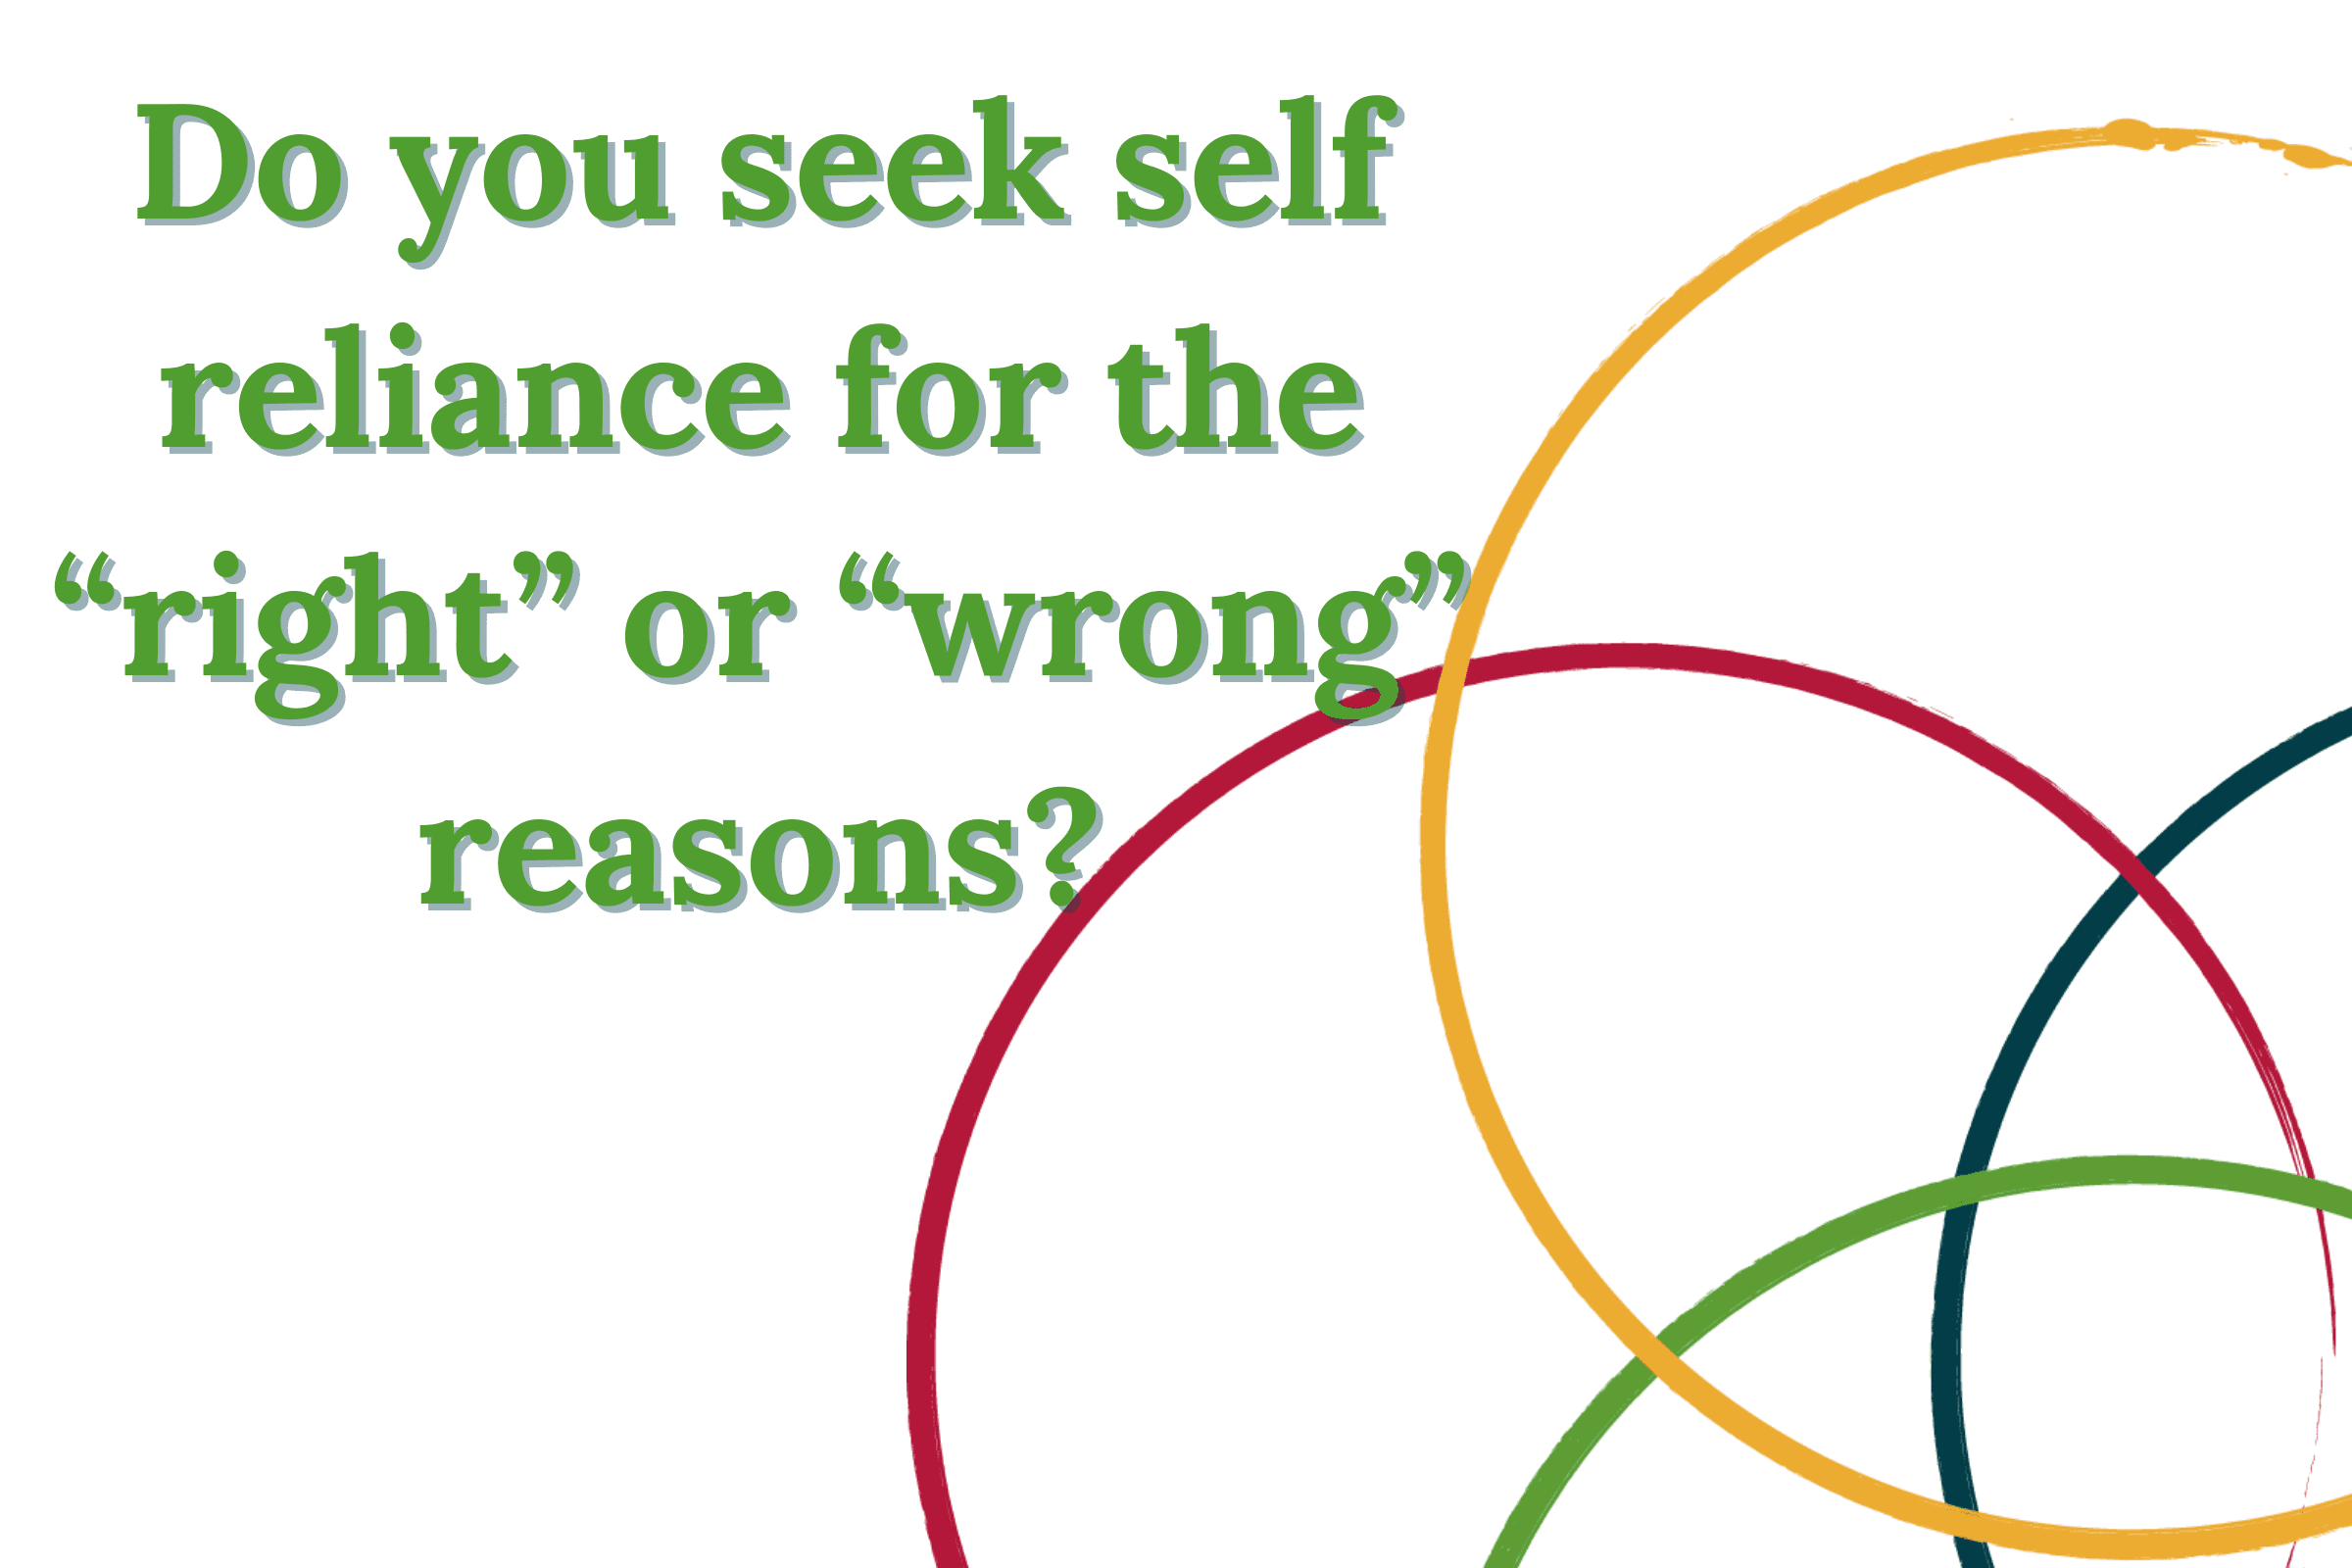 Do you seek self reliance for the right or wrong reasons?